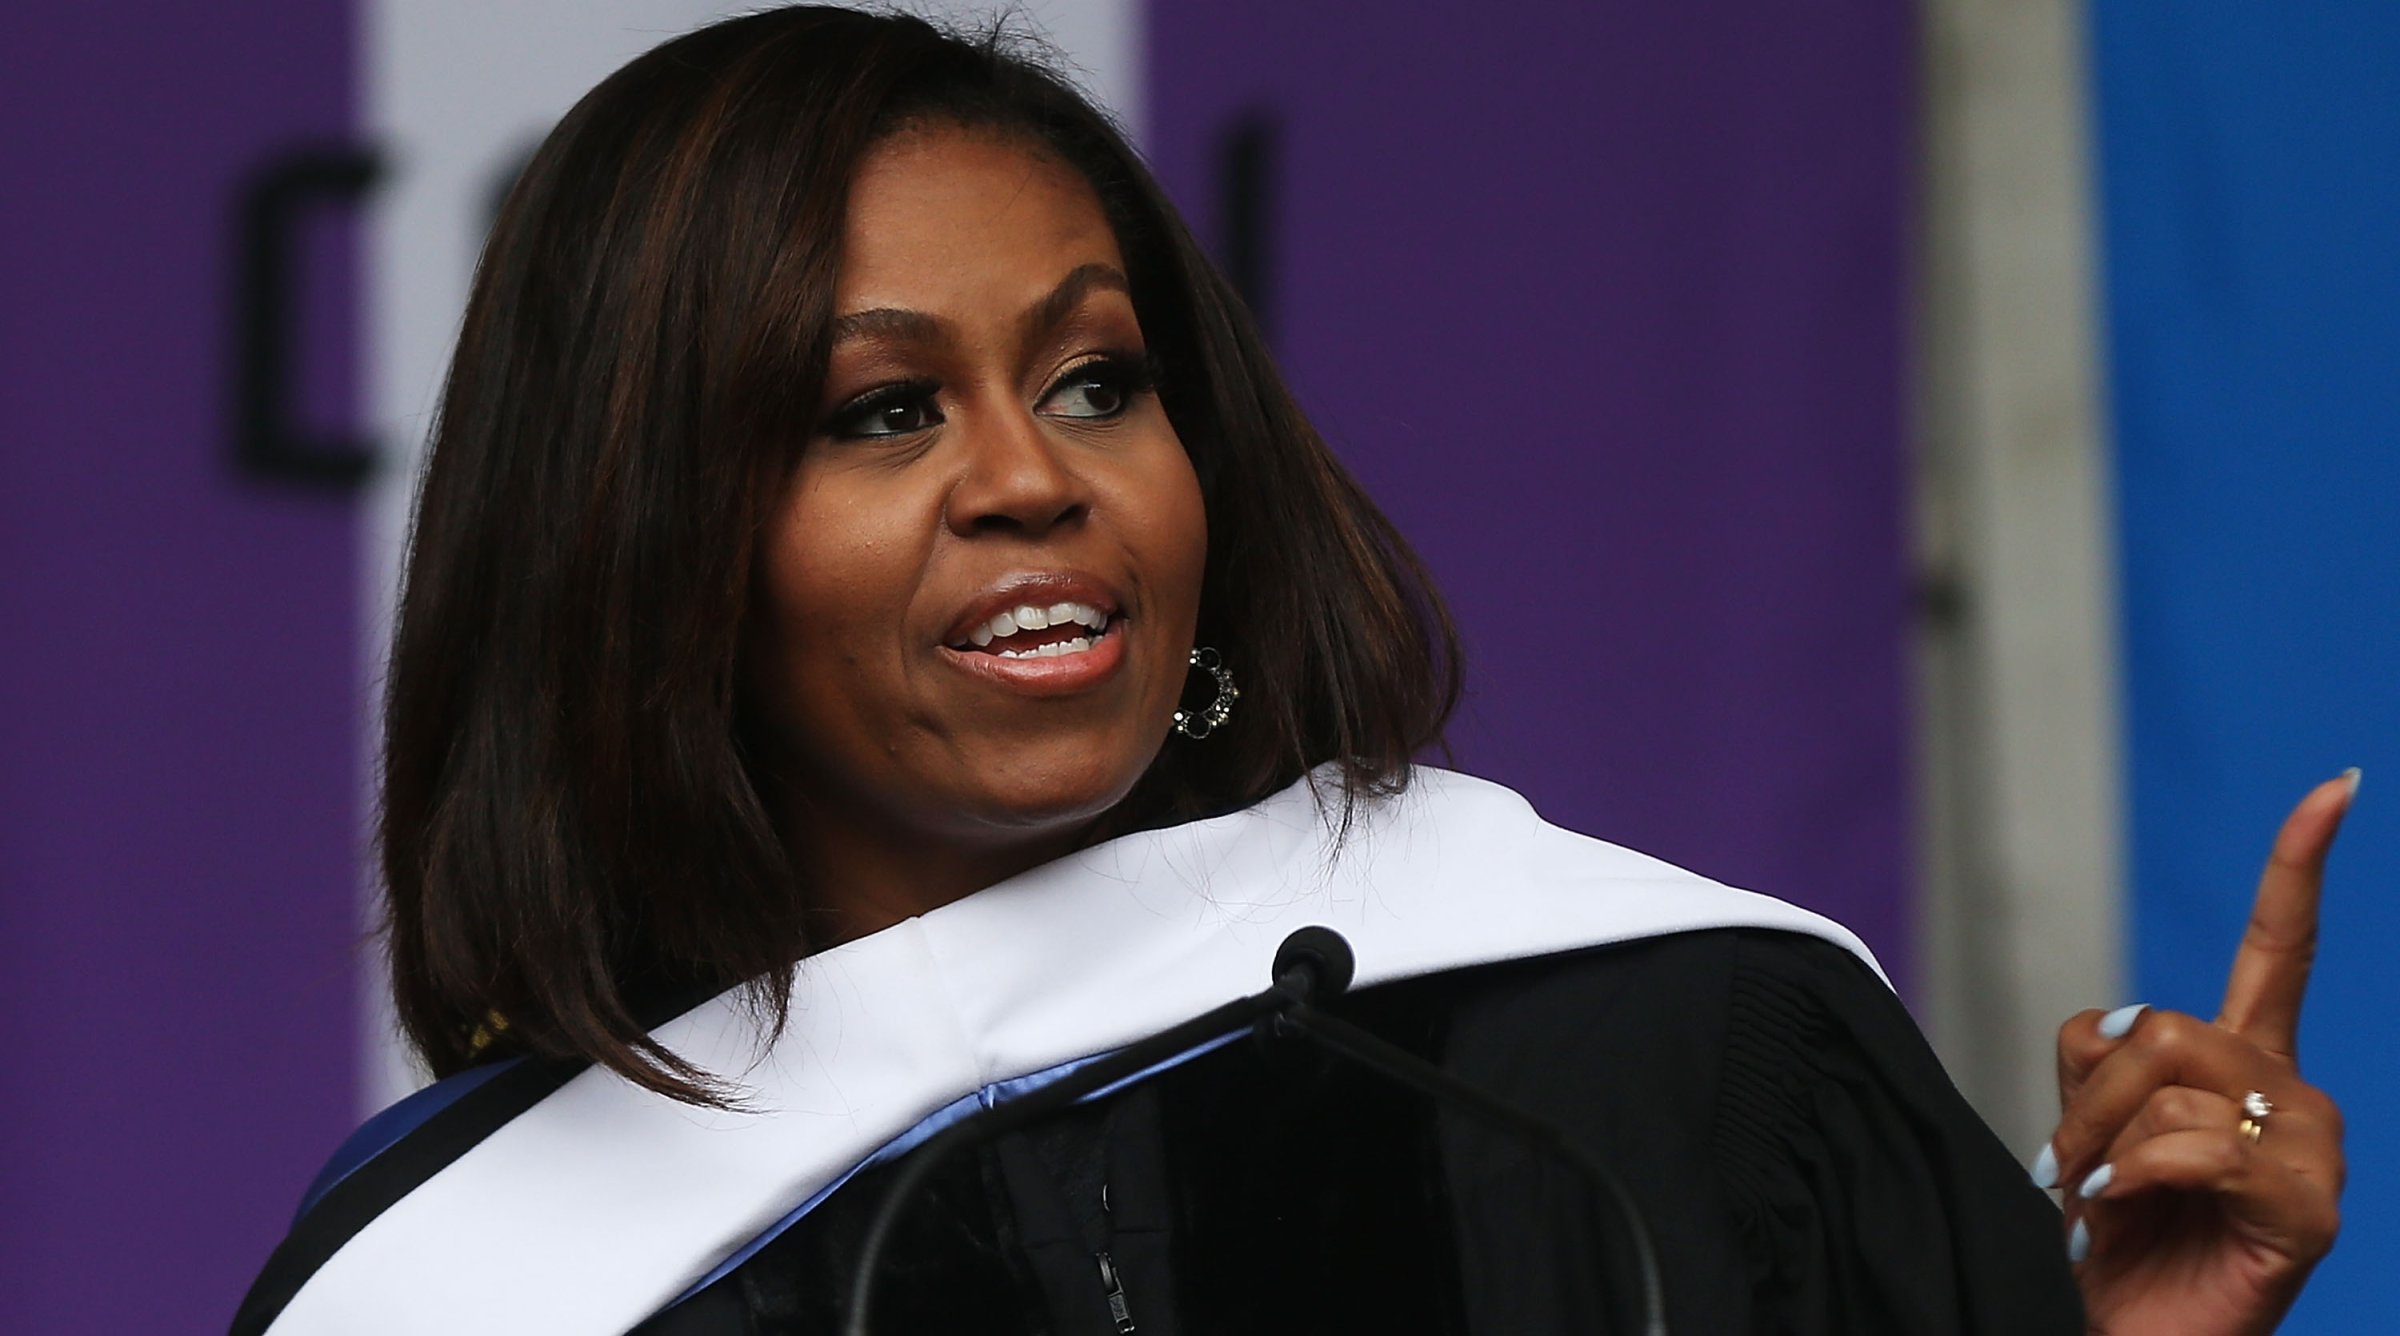 Michelle Obama delivers the commencement speech after being presented with an honorary doctorate of humane letters at City College in New York City on June 3, 2016.